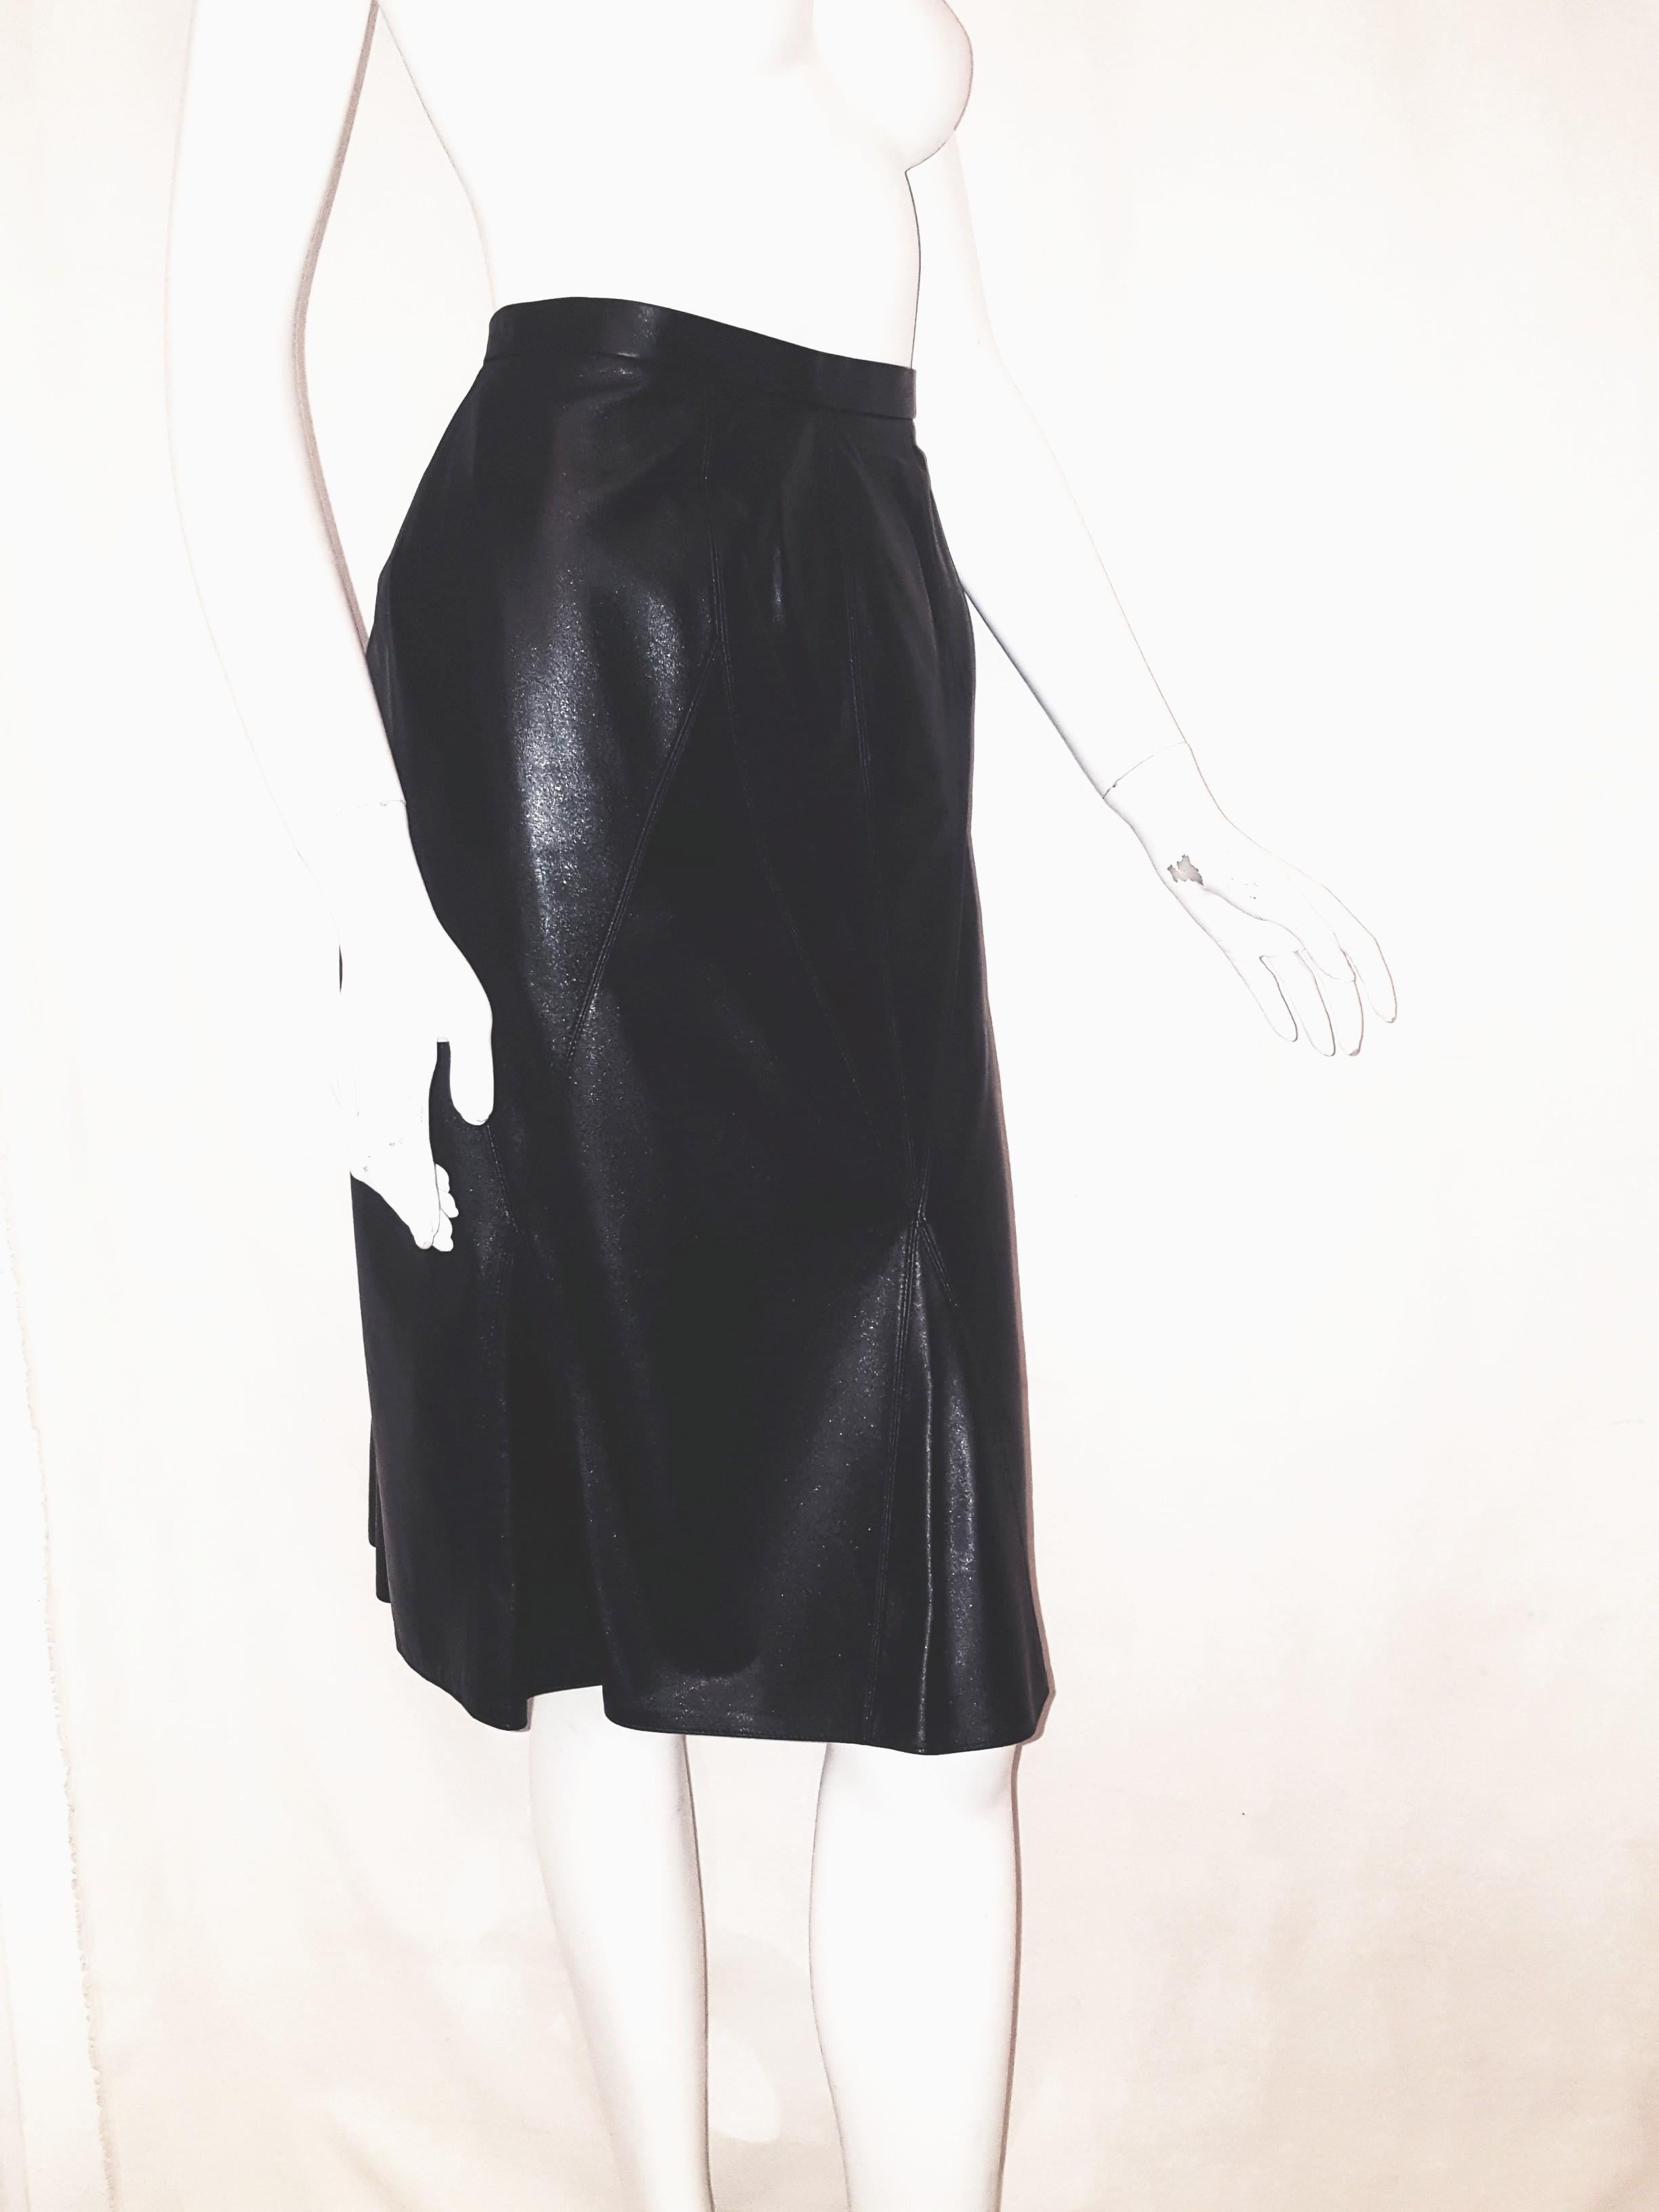 Chanel black buttery soft leather skirt from the Fall 2002 collection,  features a stitched yoke style waistband with double stitching seams down the front creating an asymmetrical ruffle around the hem.  A small Chanel metal tag is located on the